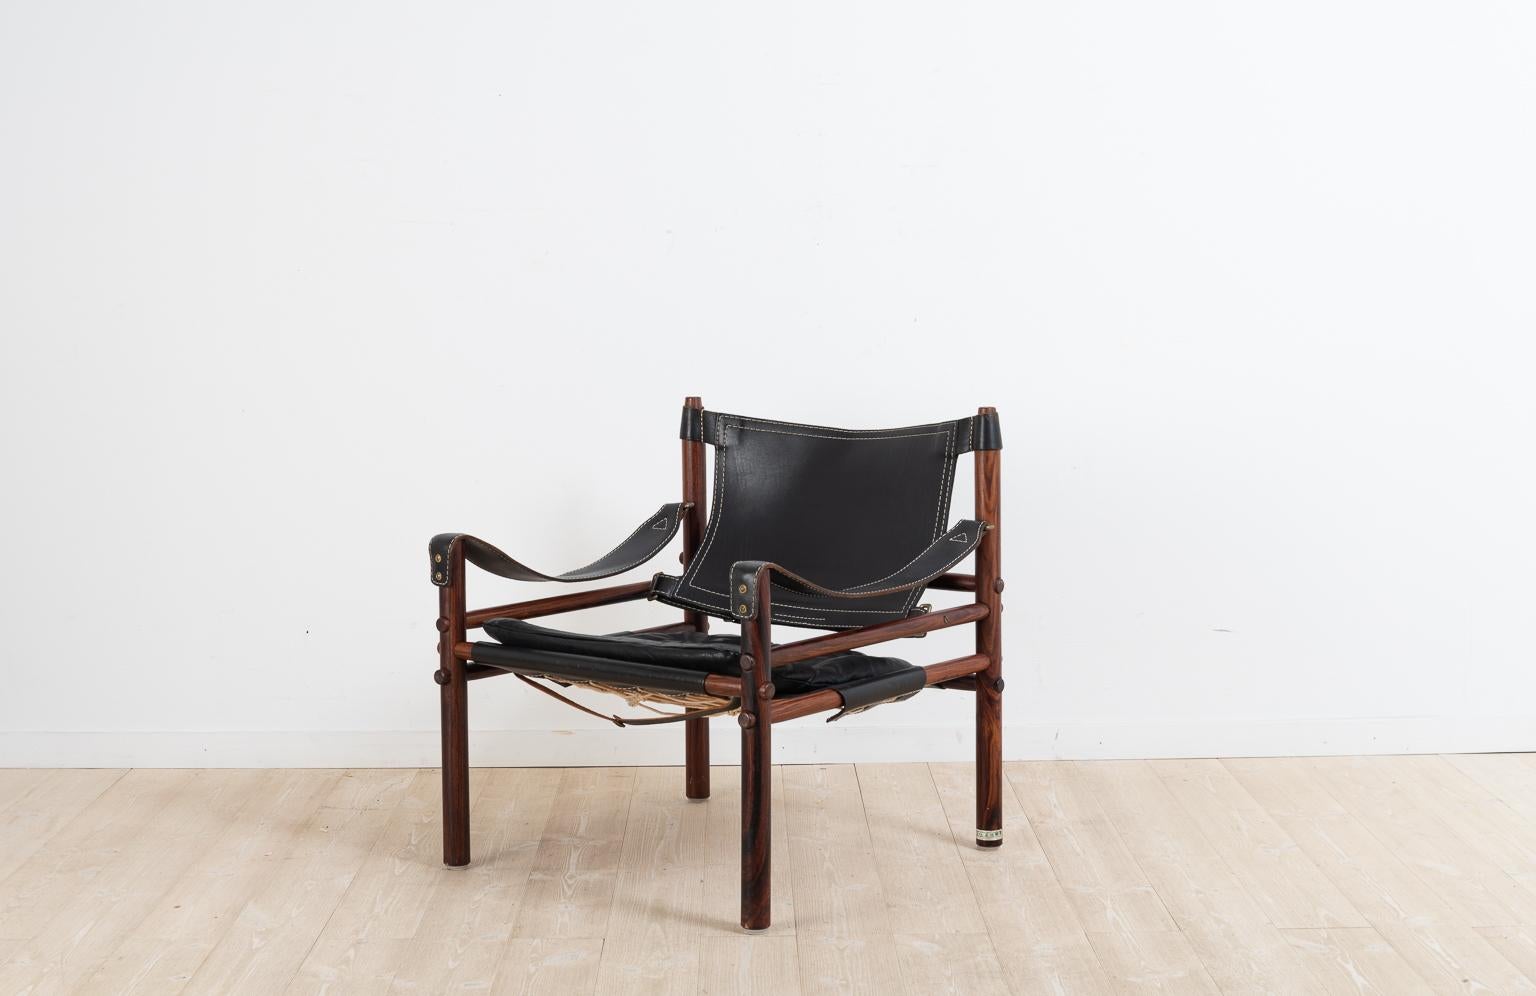 Sirocco safari chair designed by Arne Norell. The chair was manufactured by Norell Furniture during the second half of the 20th century. The original makers mark is available and seen on the pictures, on one of the back legs. The frame is